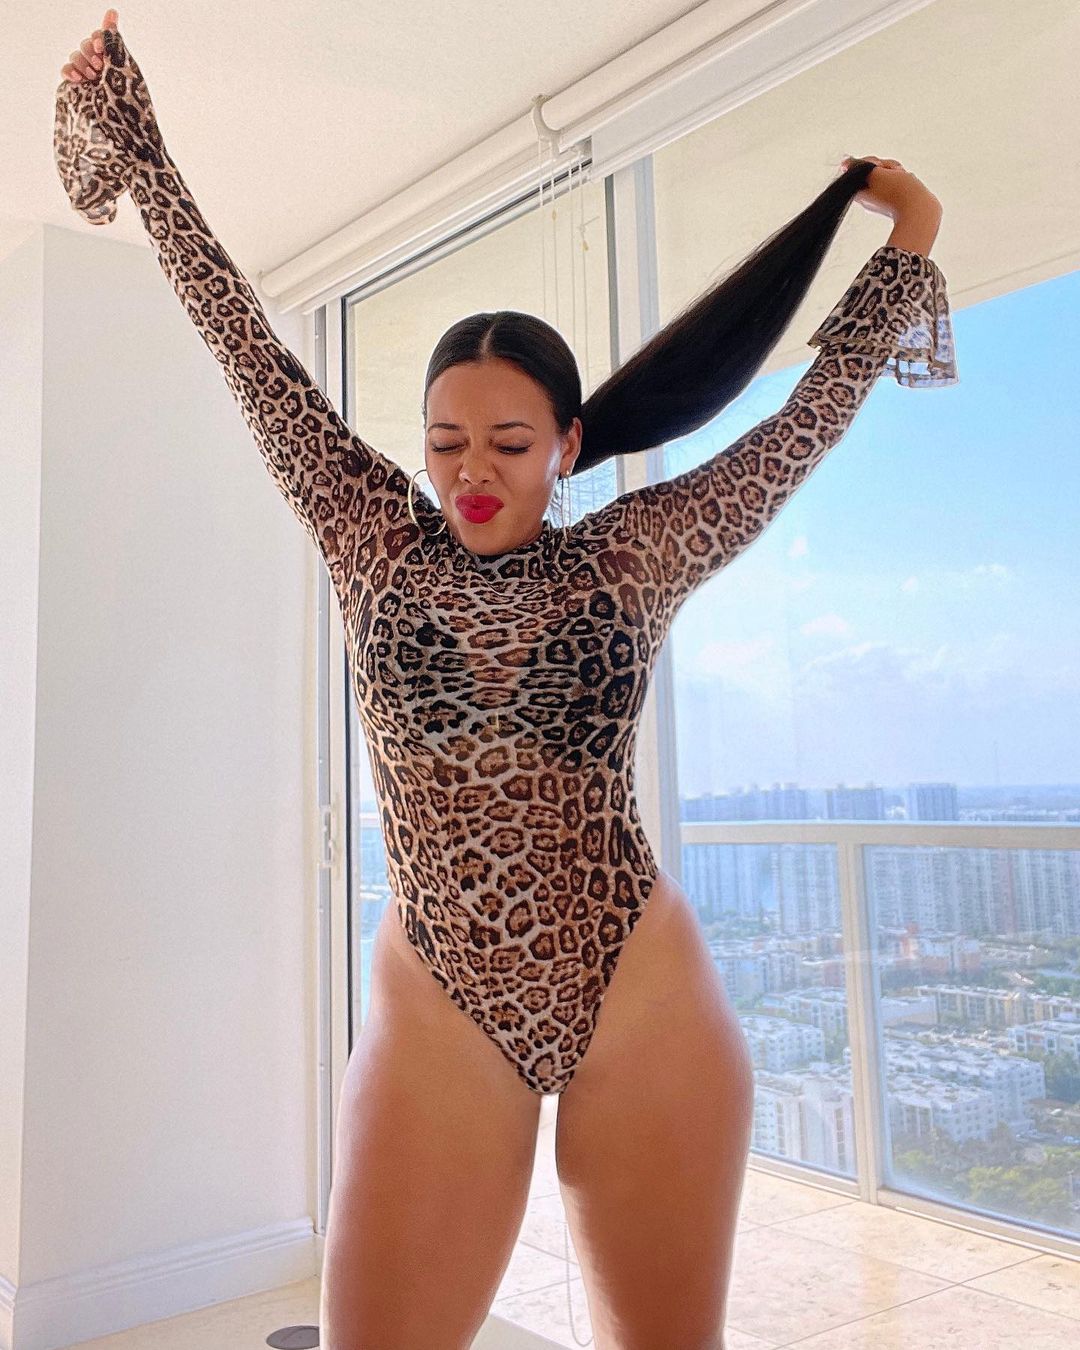 Curves And Confidence: Celebrity Women Serving Body Positivity On The ‘Gram